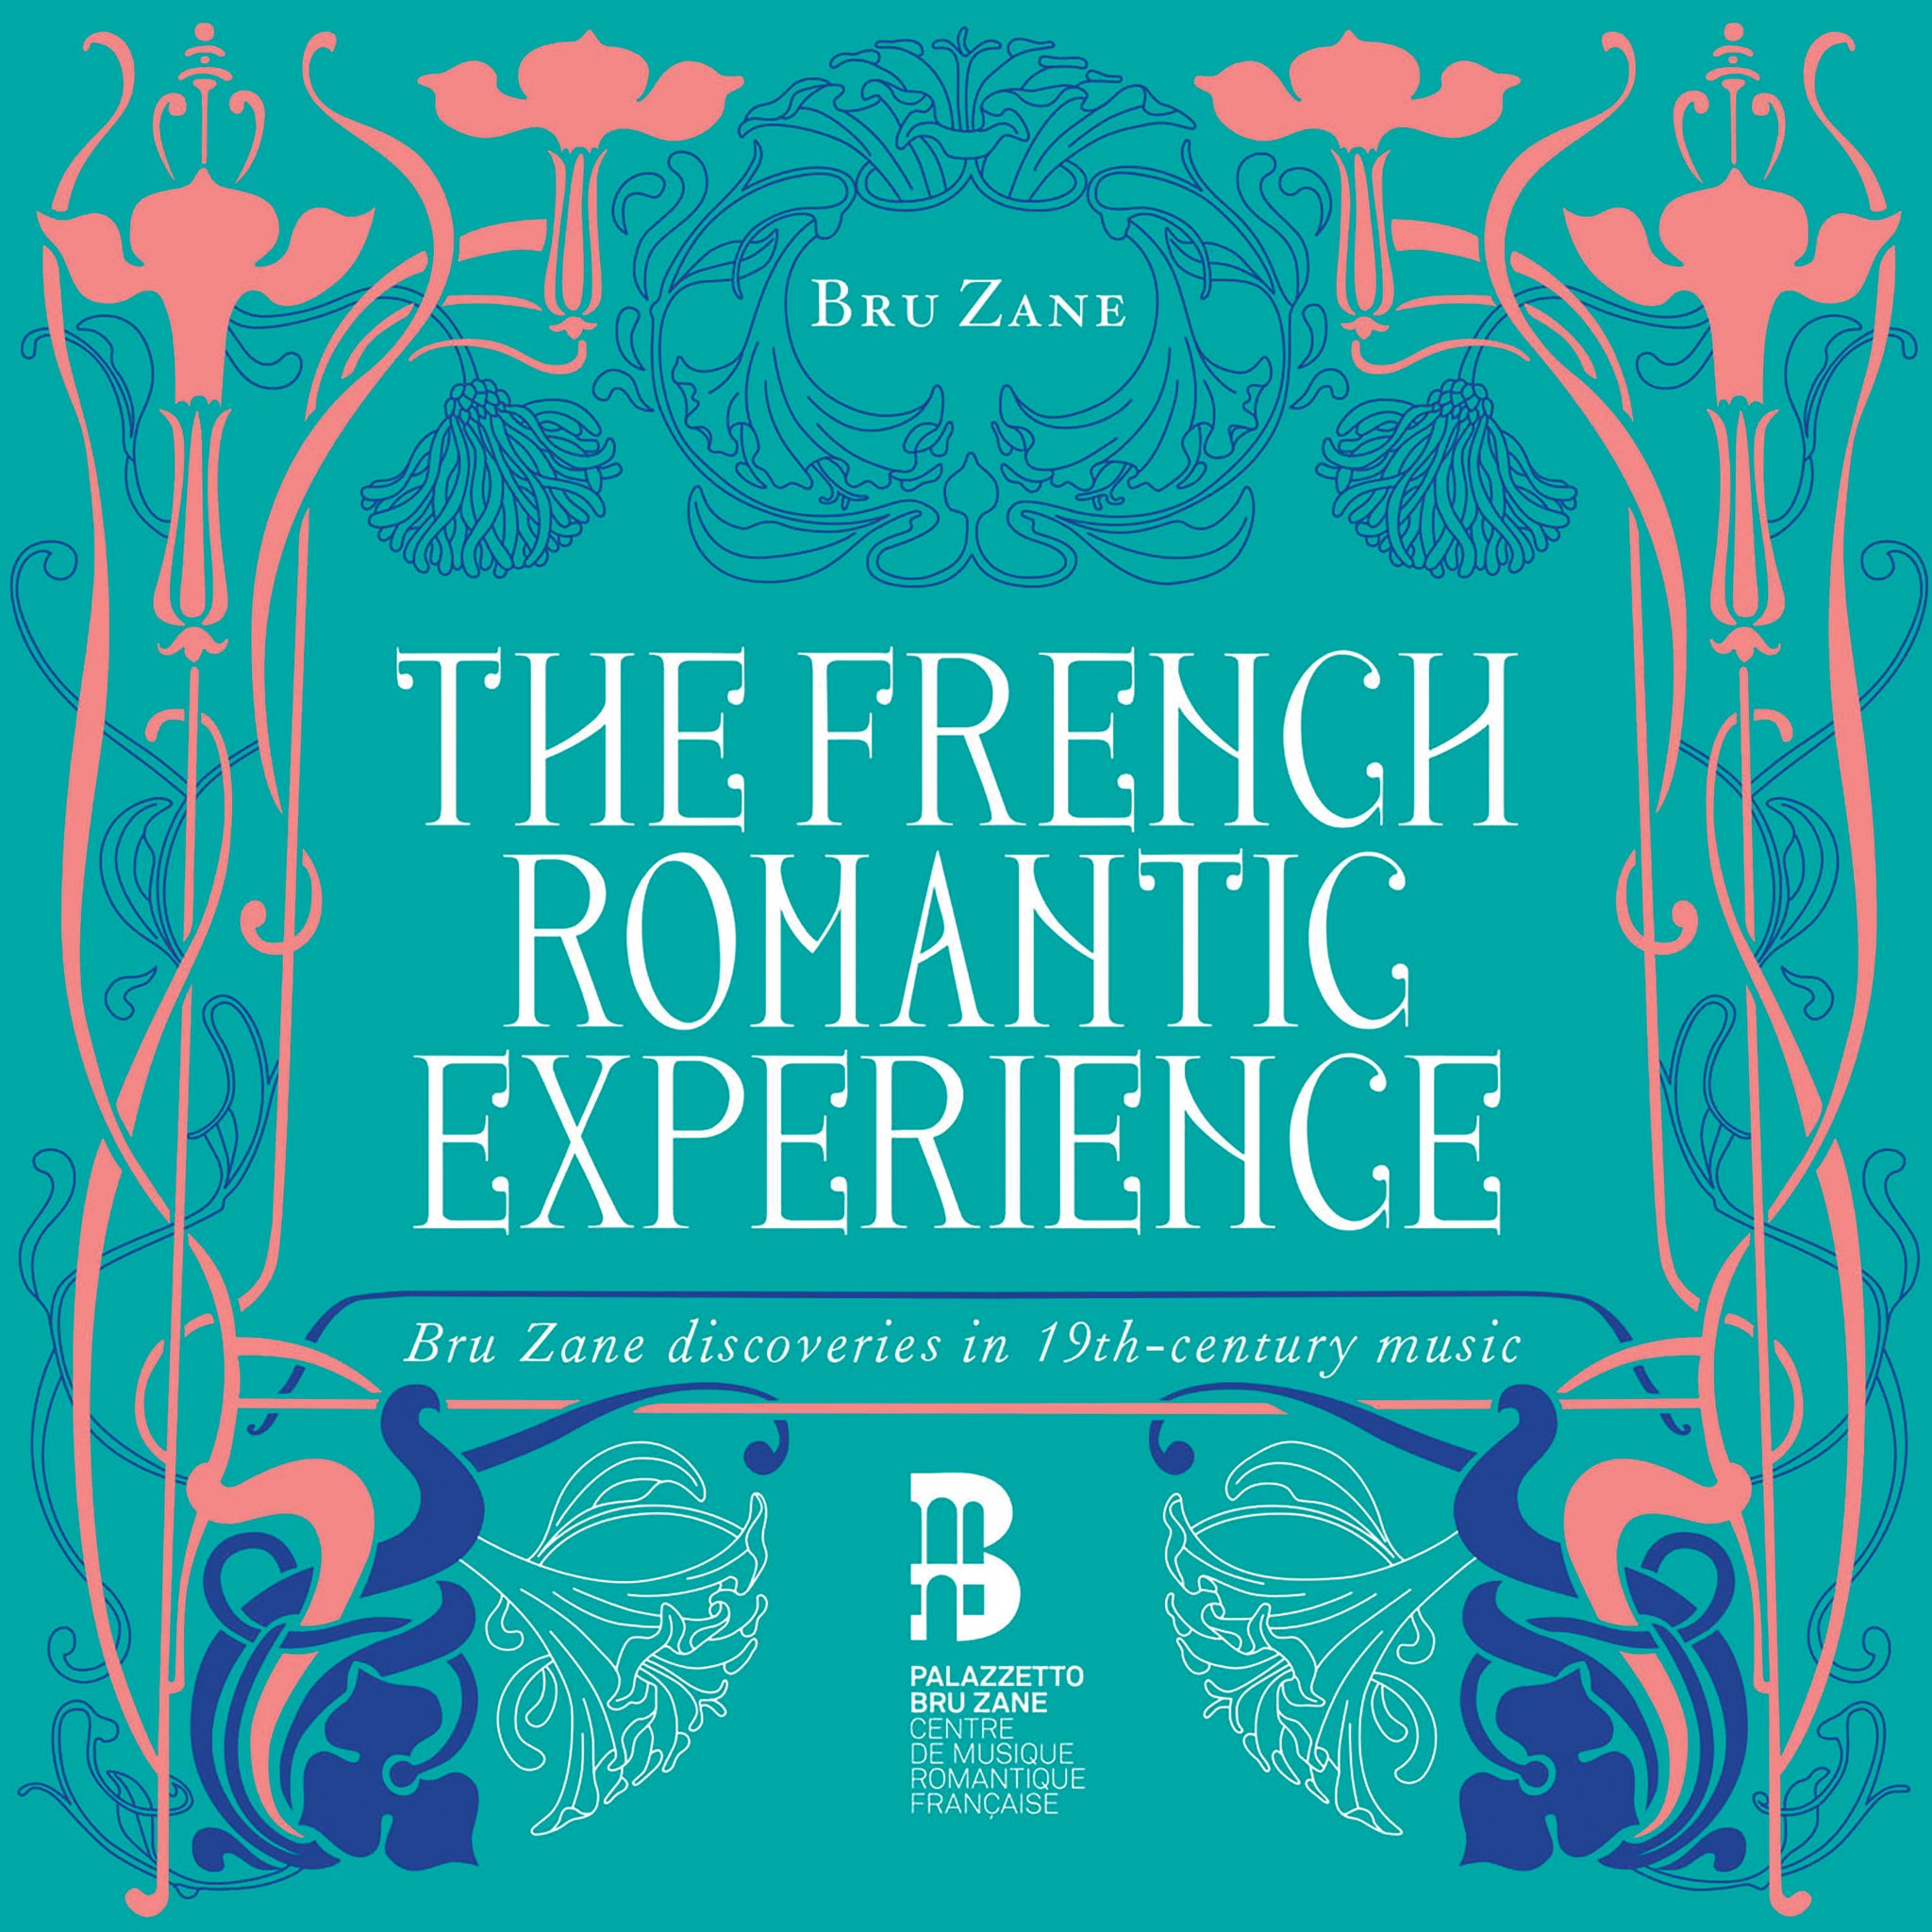 The French Romantic Experience